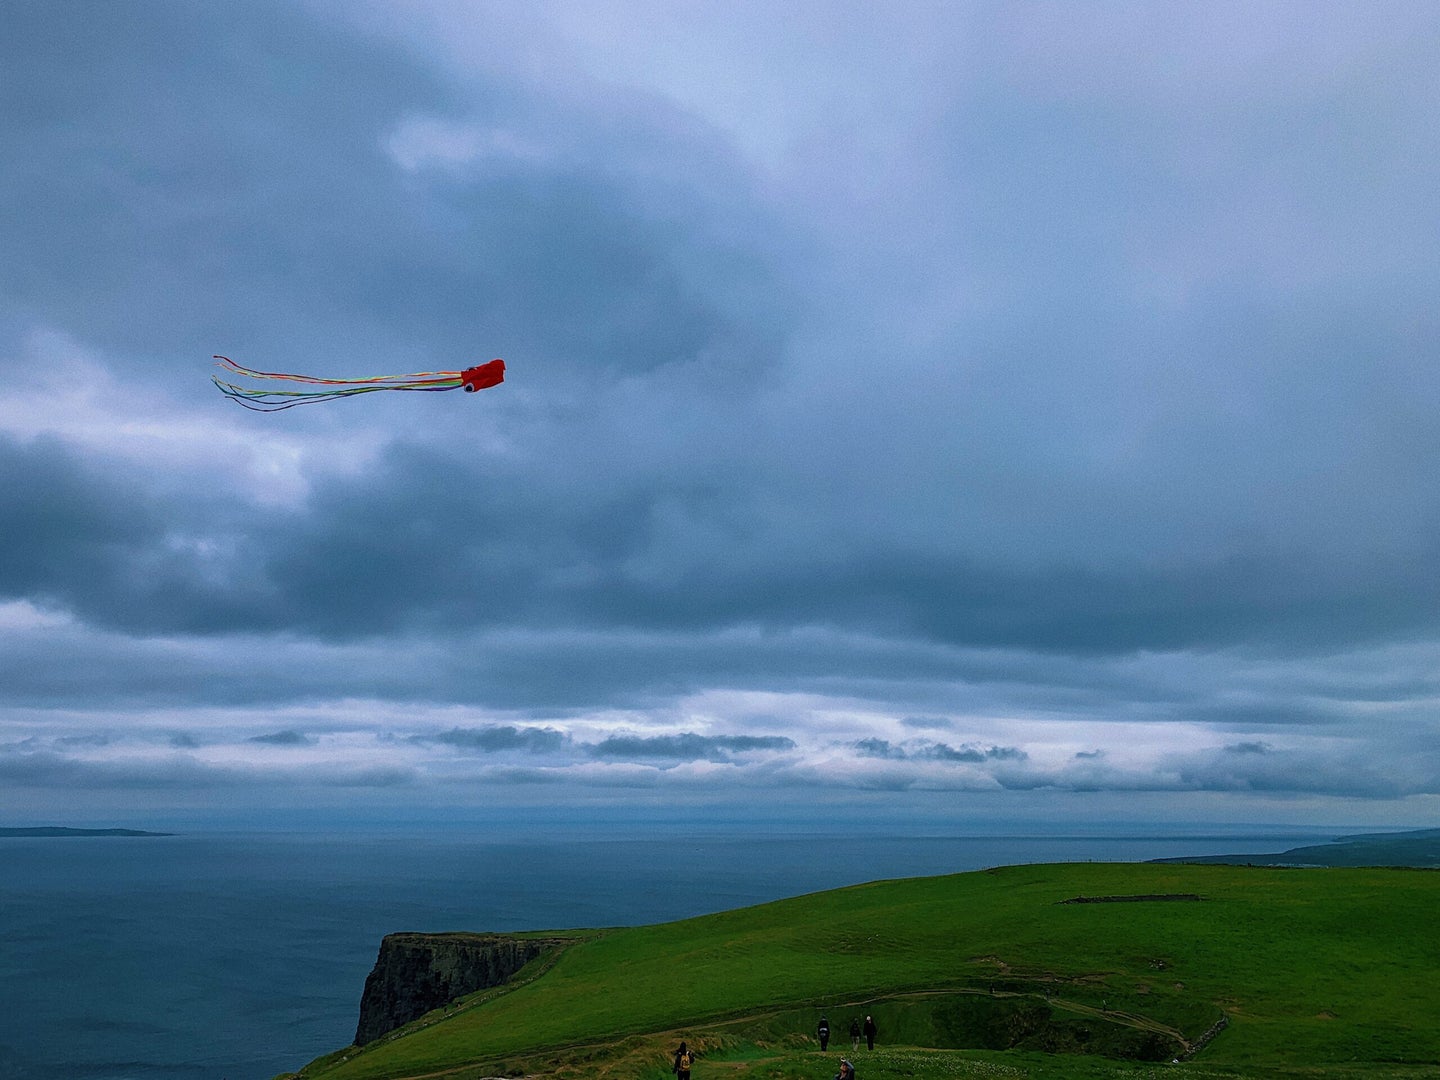 A kite flying above a seaside cliff under cloudy skies.